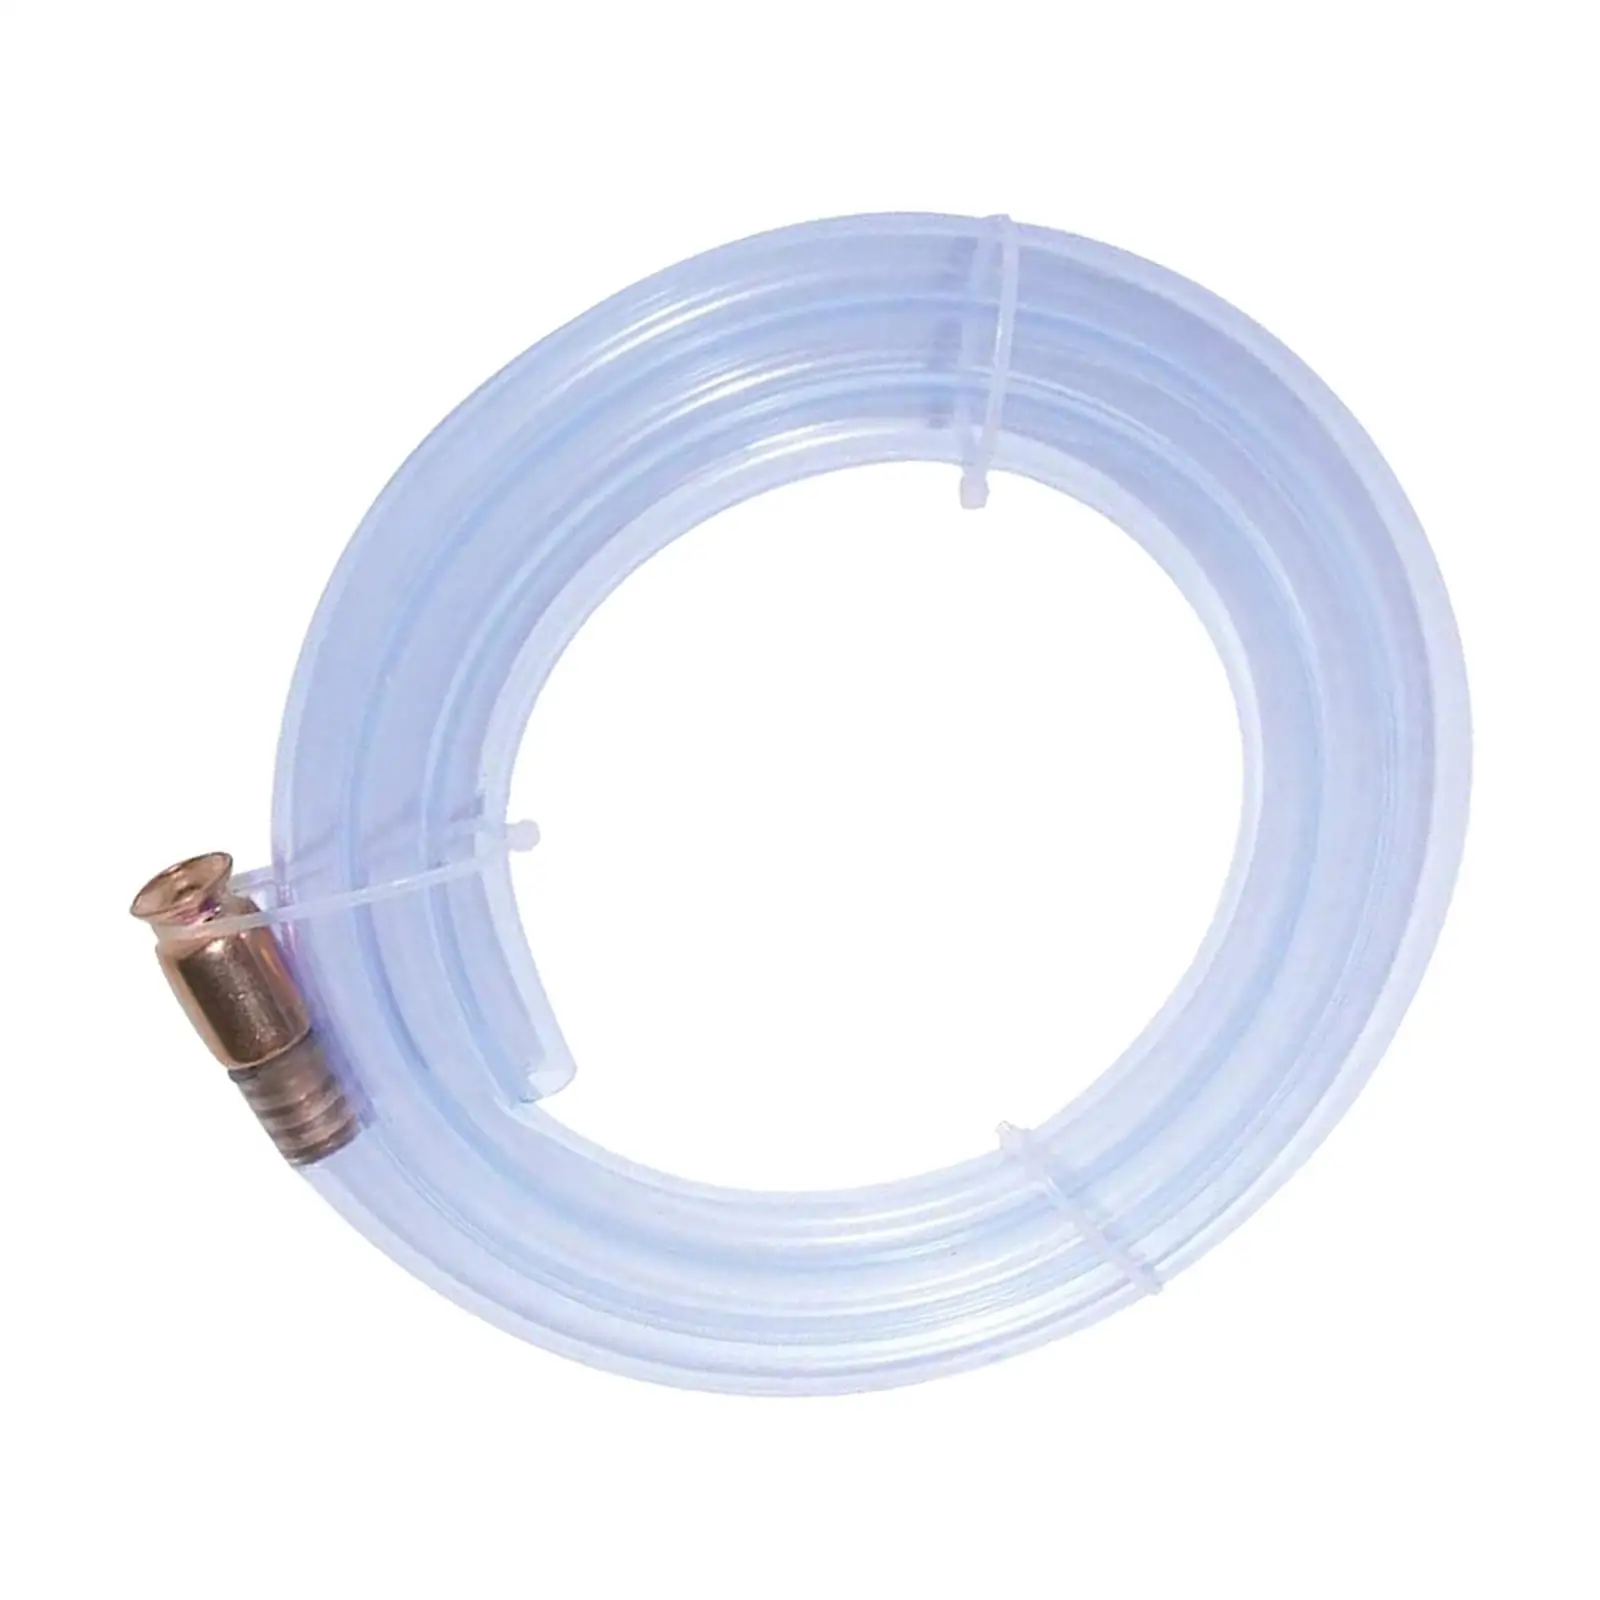 Transparent Siphon Hose 3/4 inch 118inch for Fuel Transfering Multifunctional